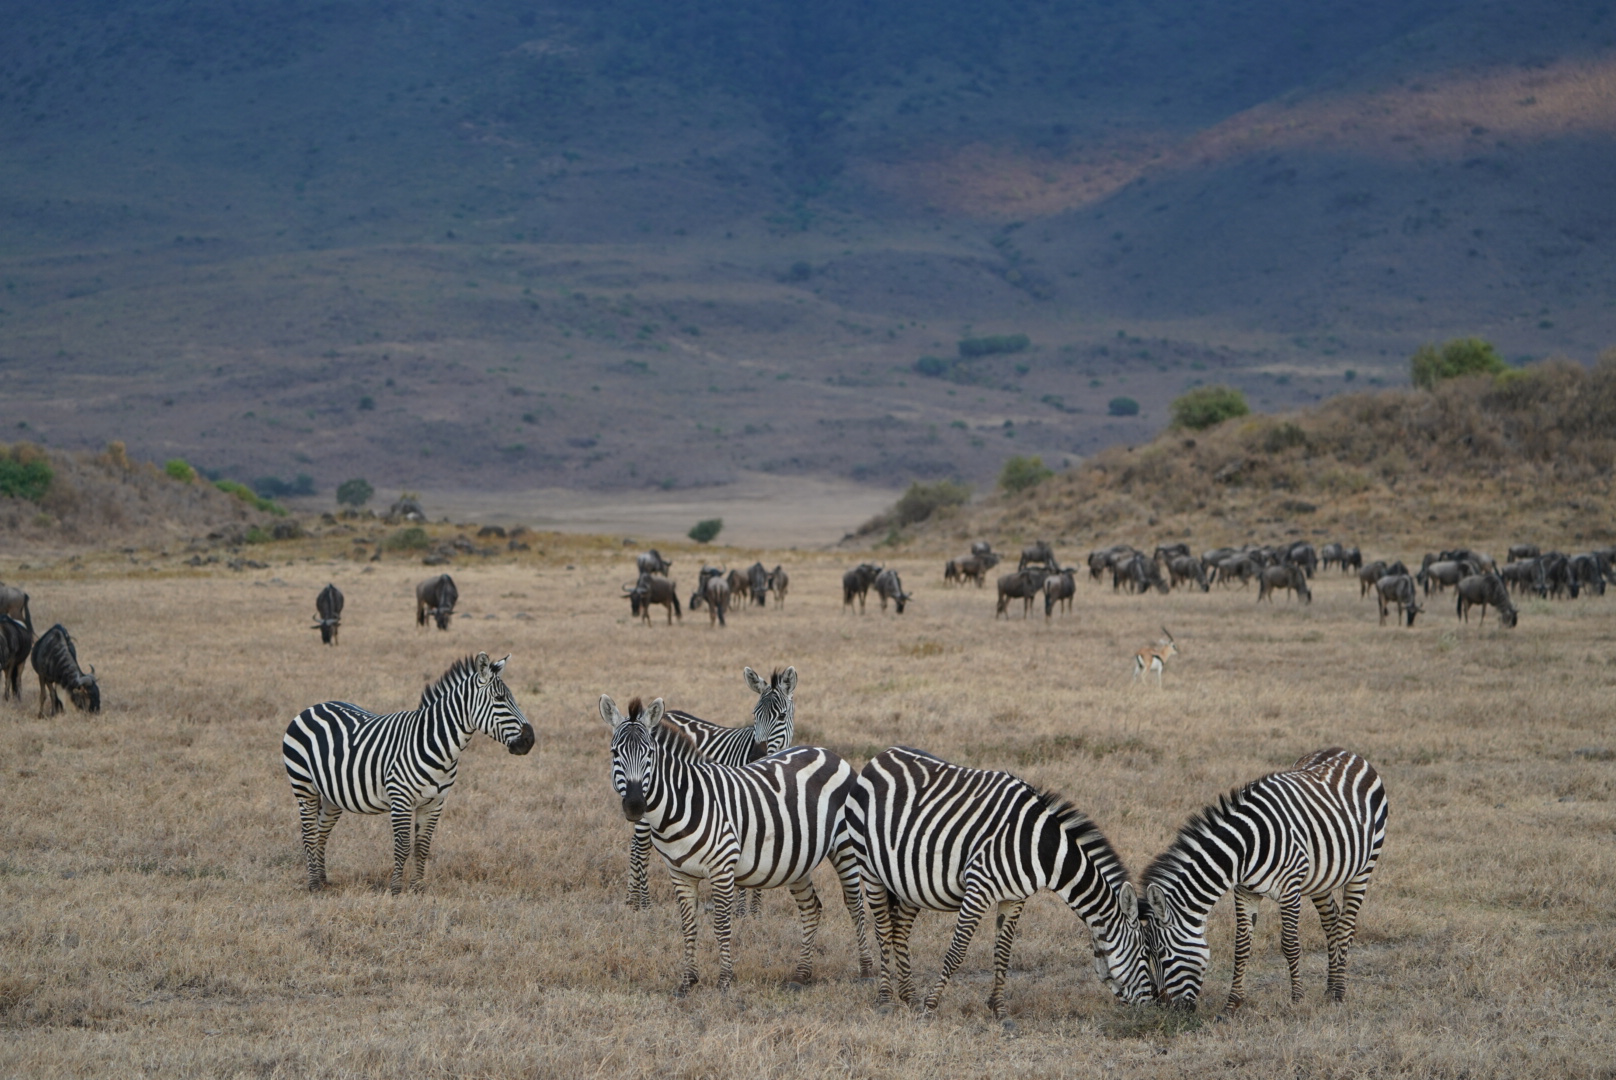 Zebras graze in a large brown, grassy field that elevates slowly into a mountain. Two zebras in the front press their foreheads together.